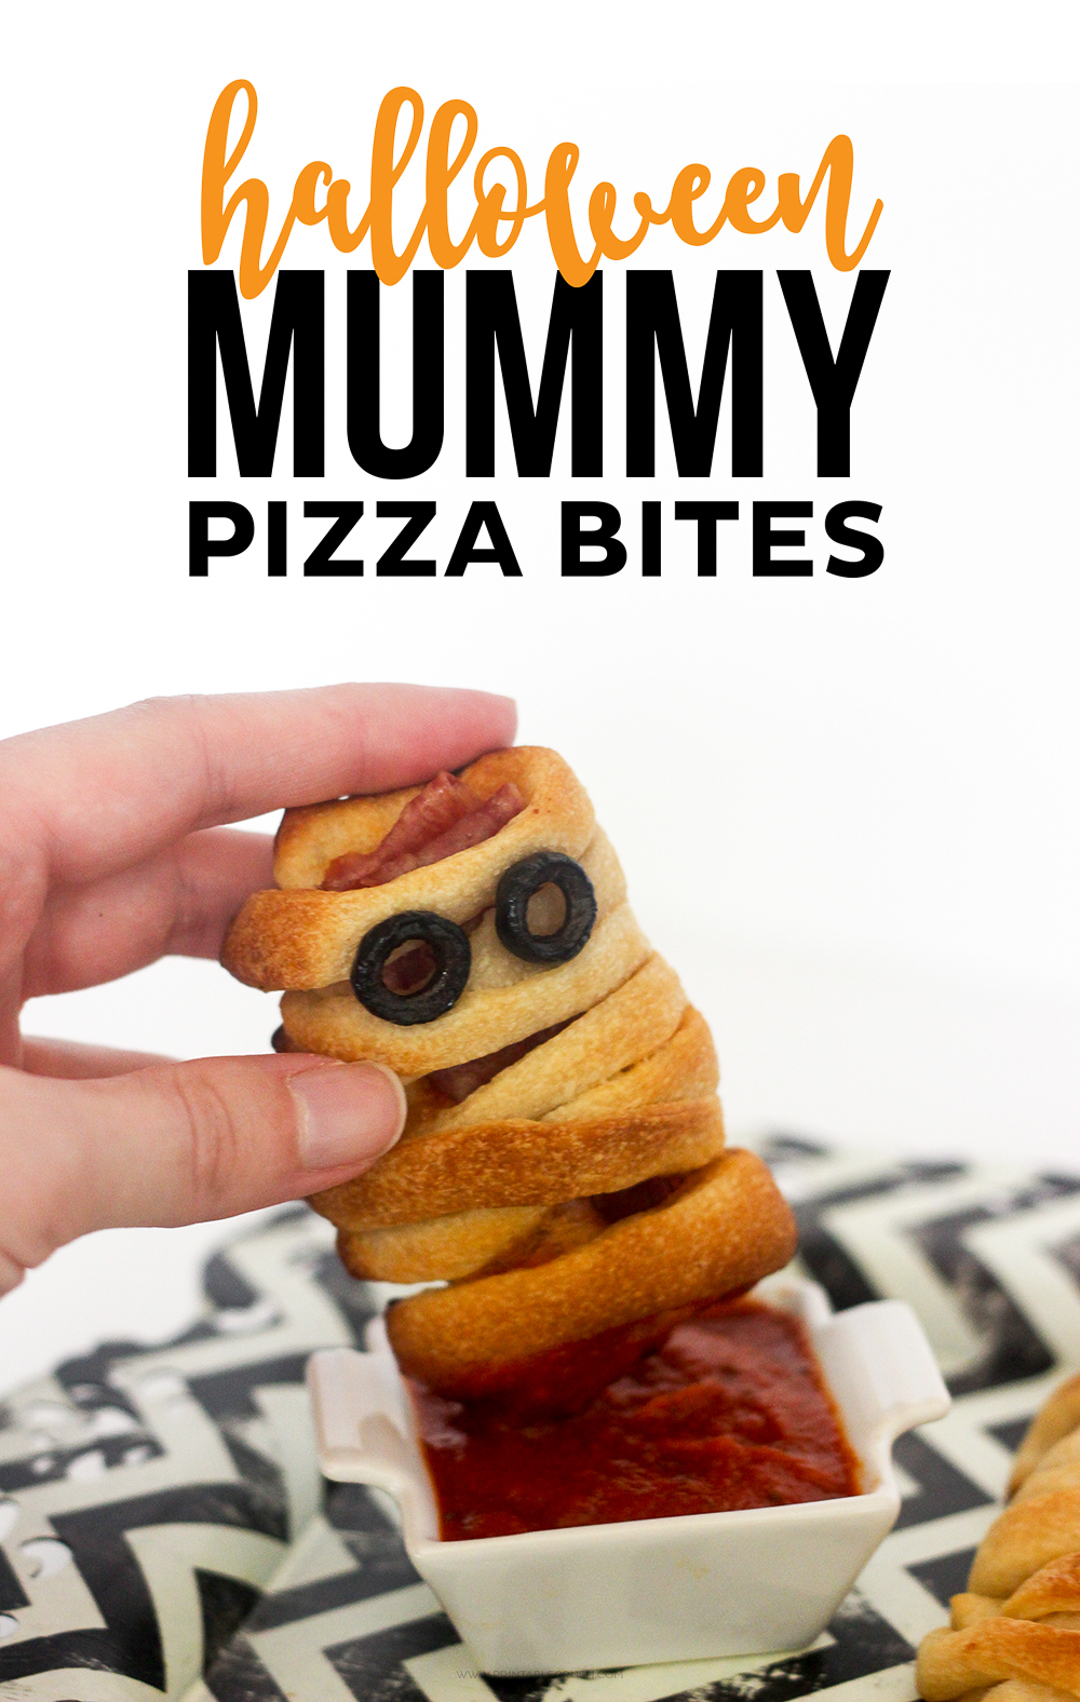 Scary Halloween treat of a mummy pizza bite dipped into sauce.